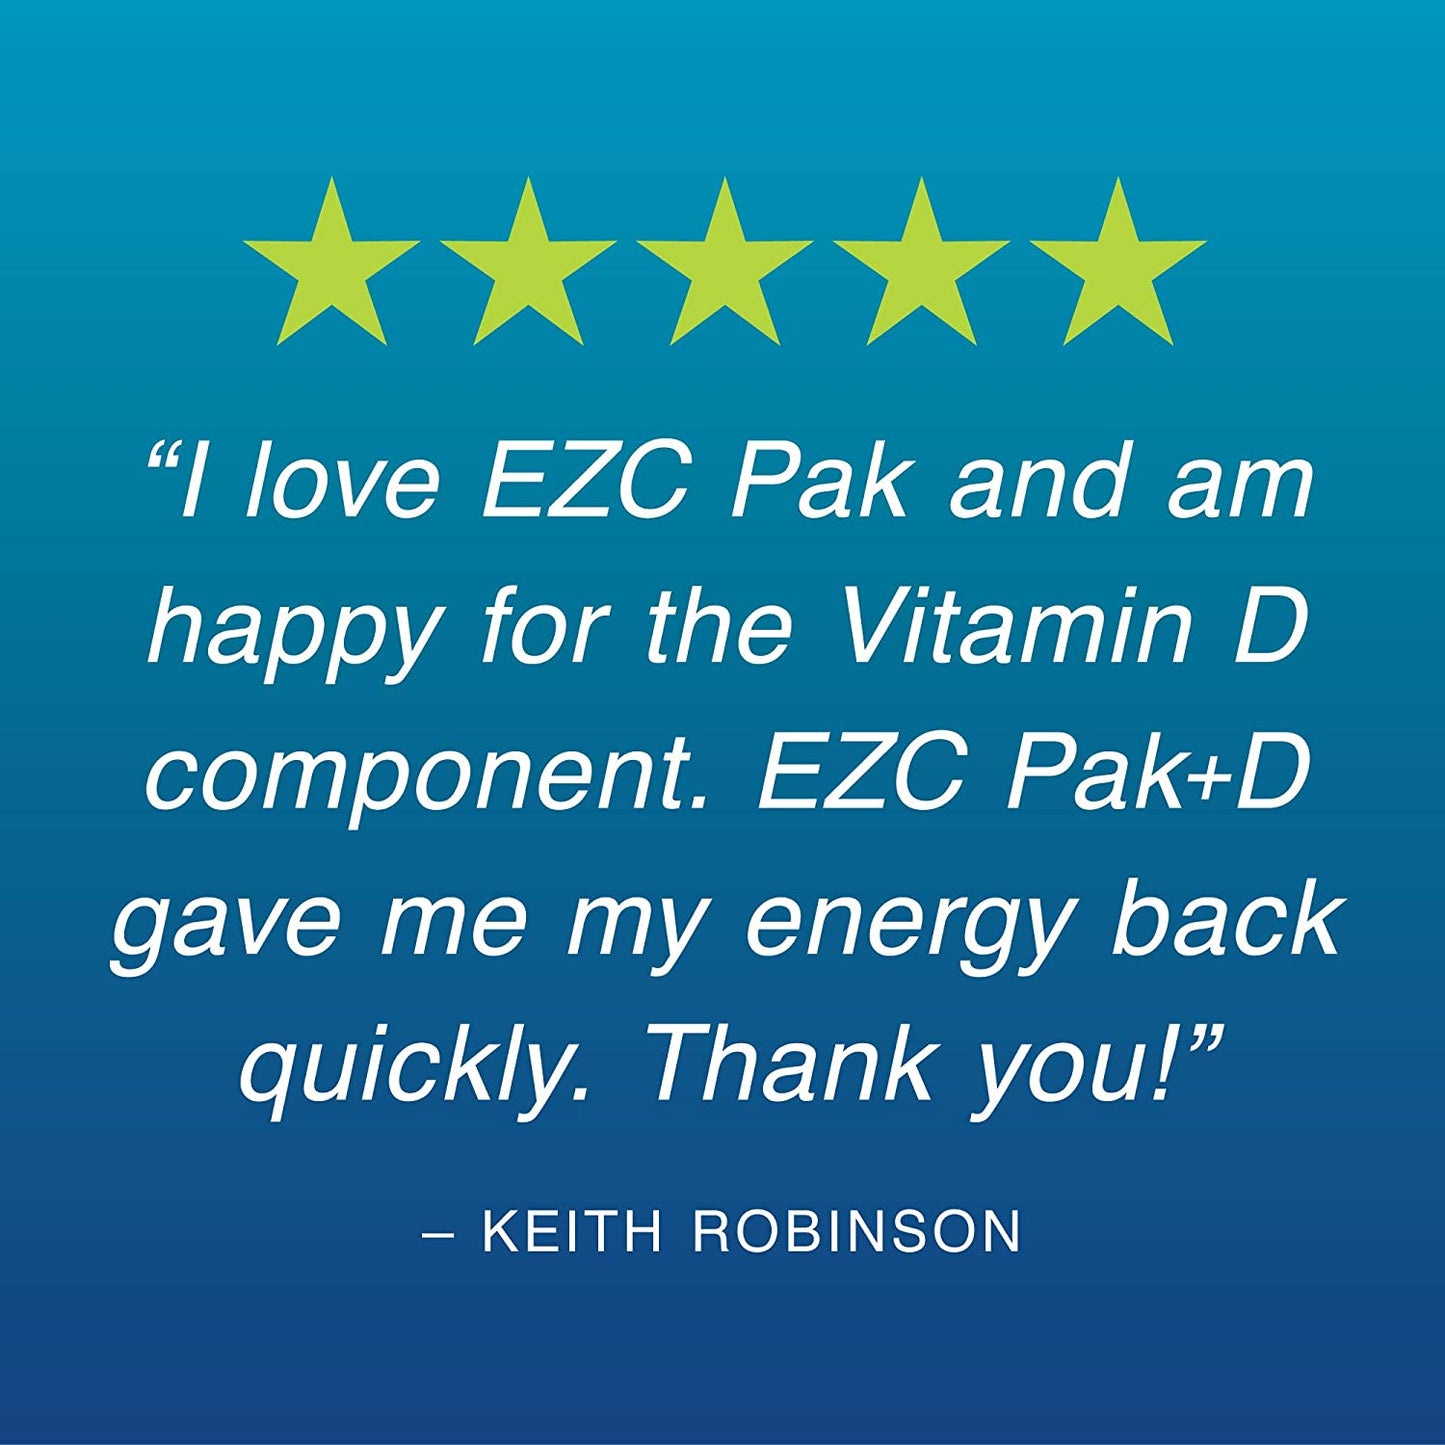 EzcpakD five star testimonial i love ezc pak and am happy for the vitamin d component ezc pak plus D gave me energy back quickly thank you